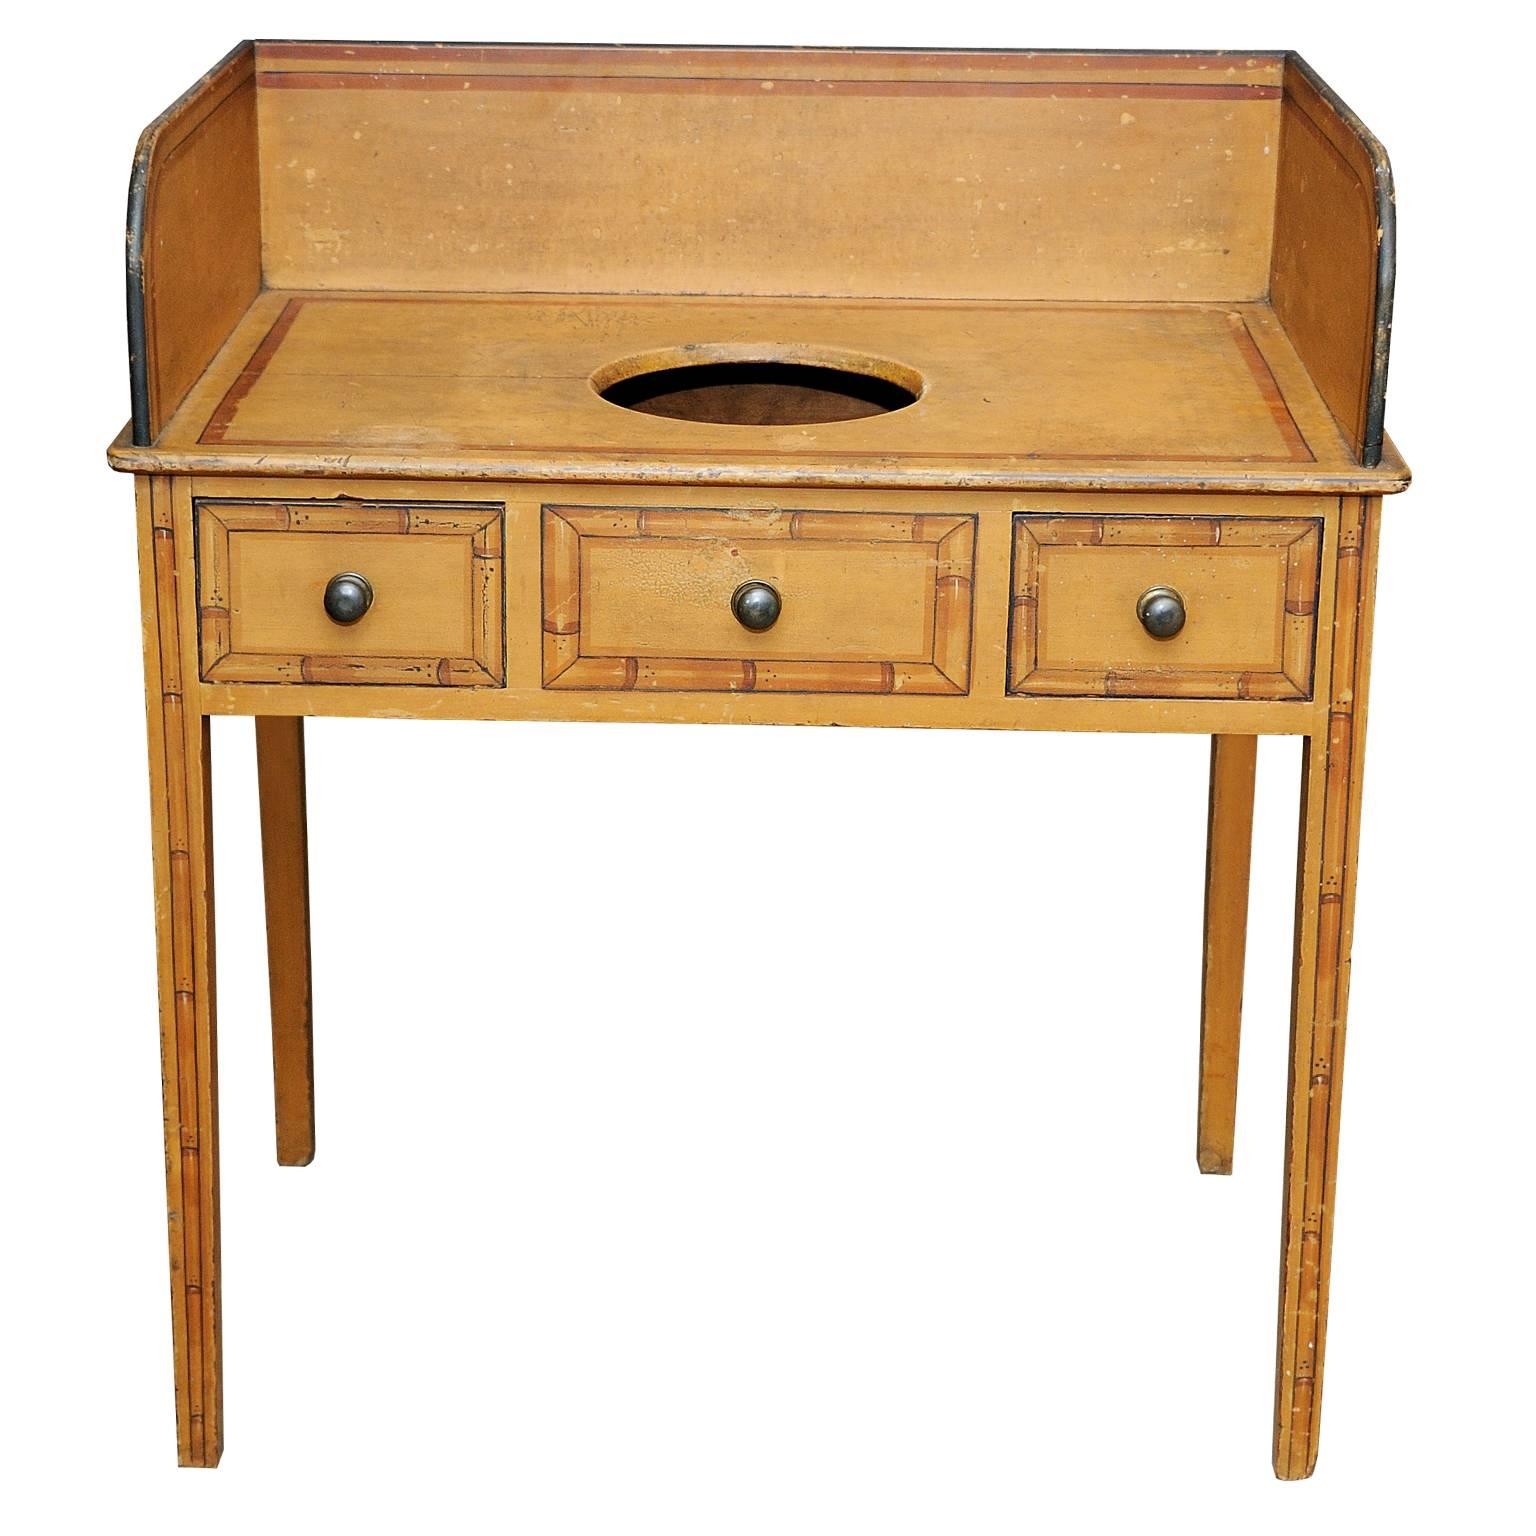 This is a great example of an English late 18th century painted faux bamboo wash stand in totally original condition featuring its original painted finish.

The wash stand has a recess in the top to take a bowl or sink, circa 1790.